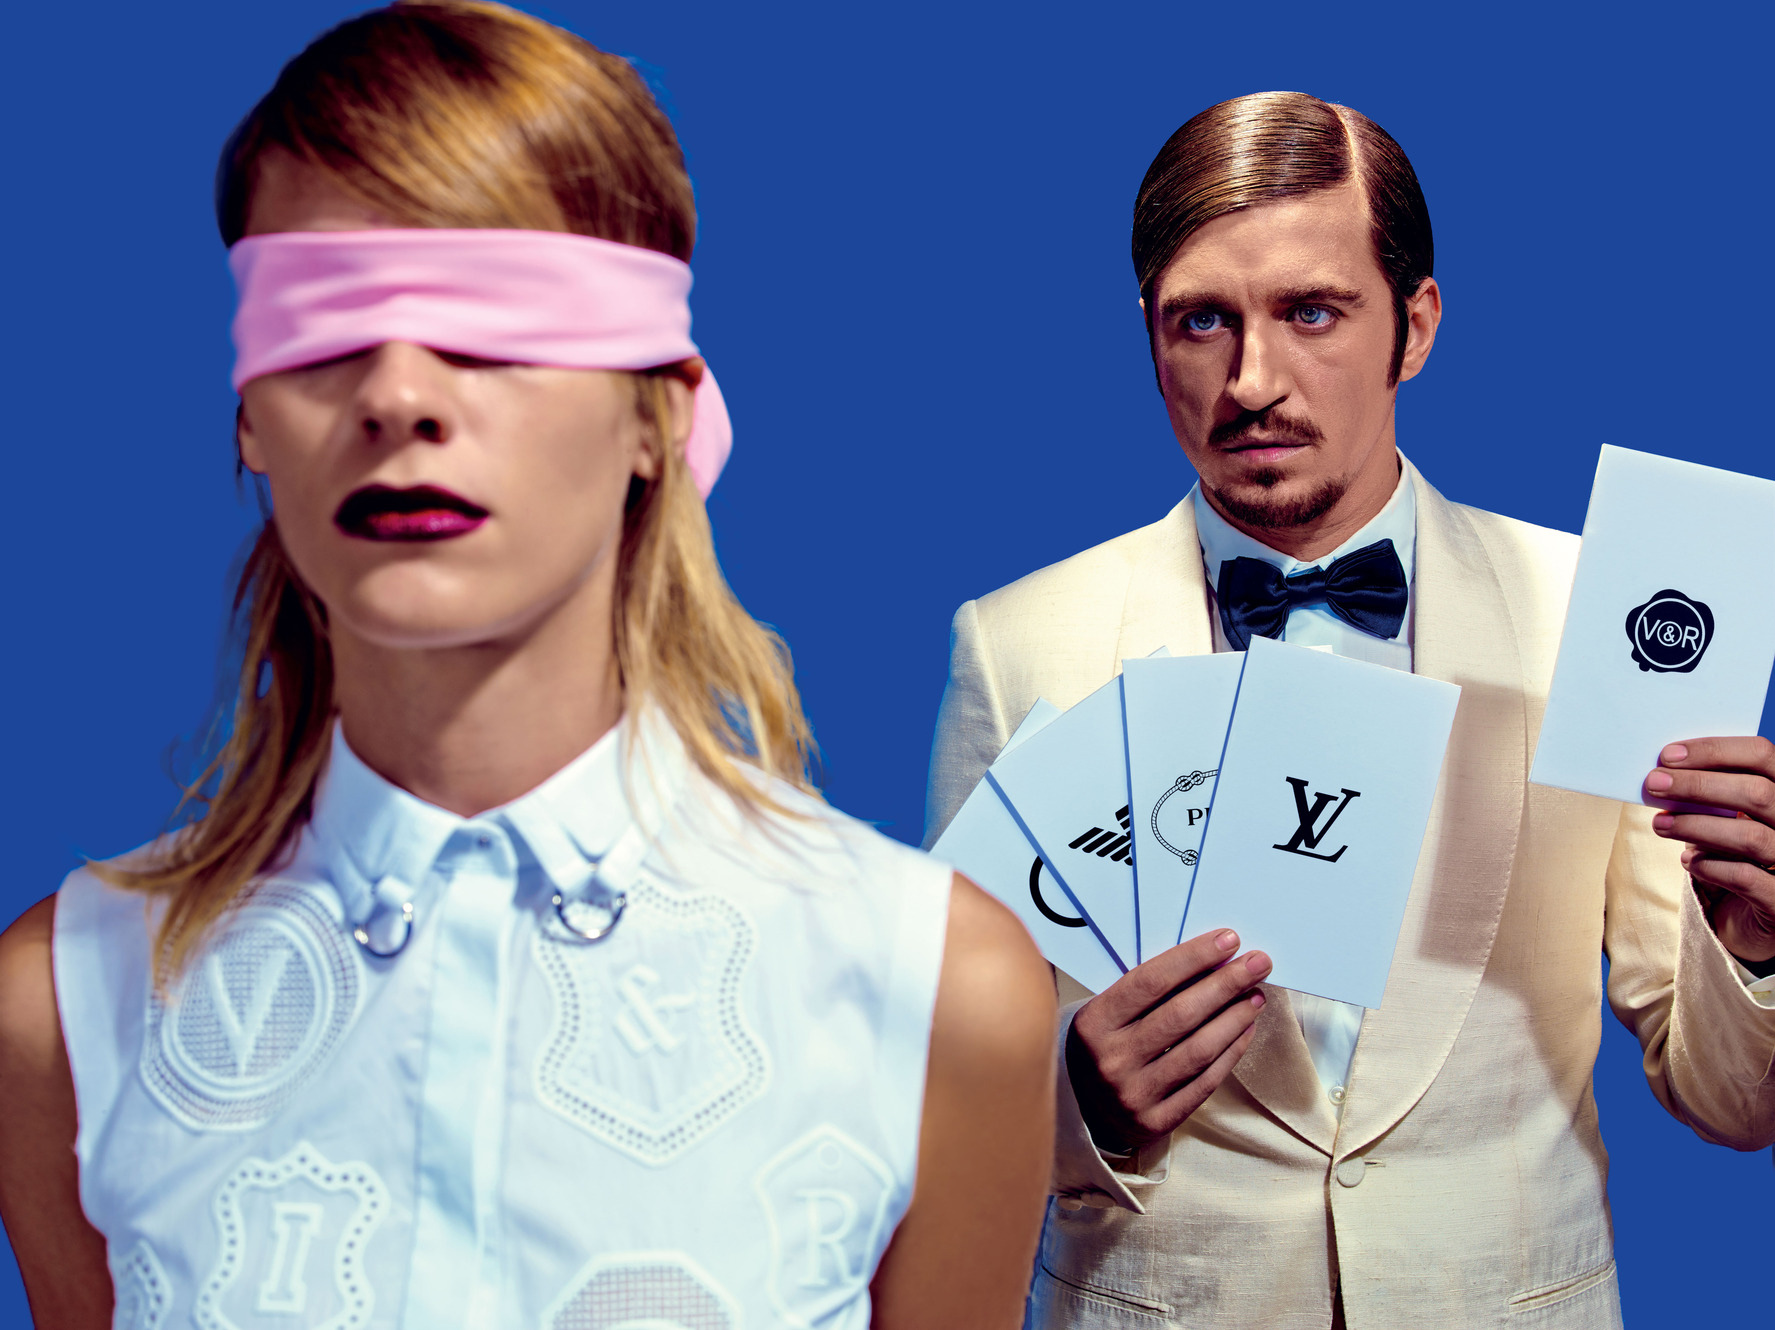 On her: shirt, Viktor & Rolf. On him: suit, shirt, and tie, Louis Vuitton. Shot by Maurizio Cattelan and Pierpaolo Ferrari for New York Magazine 